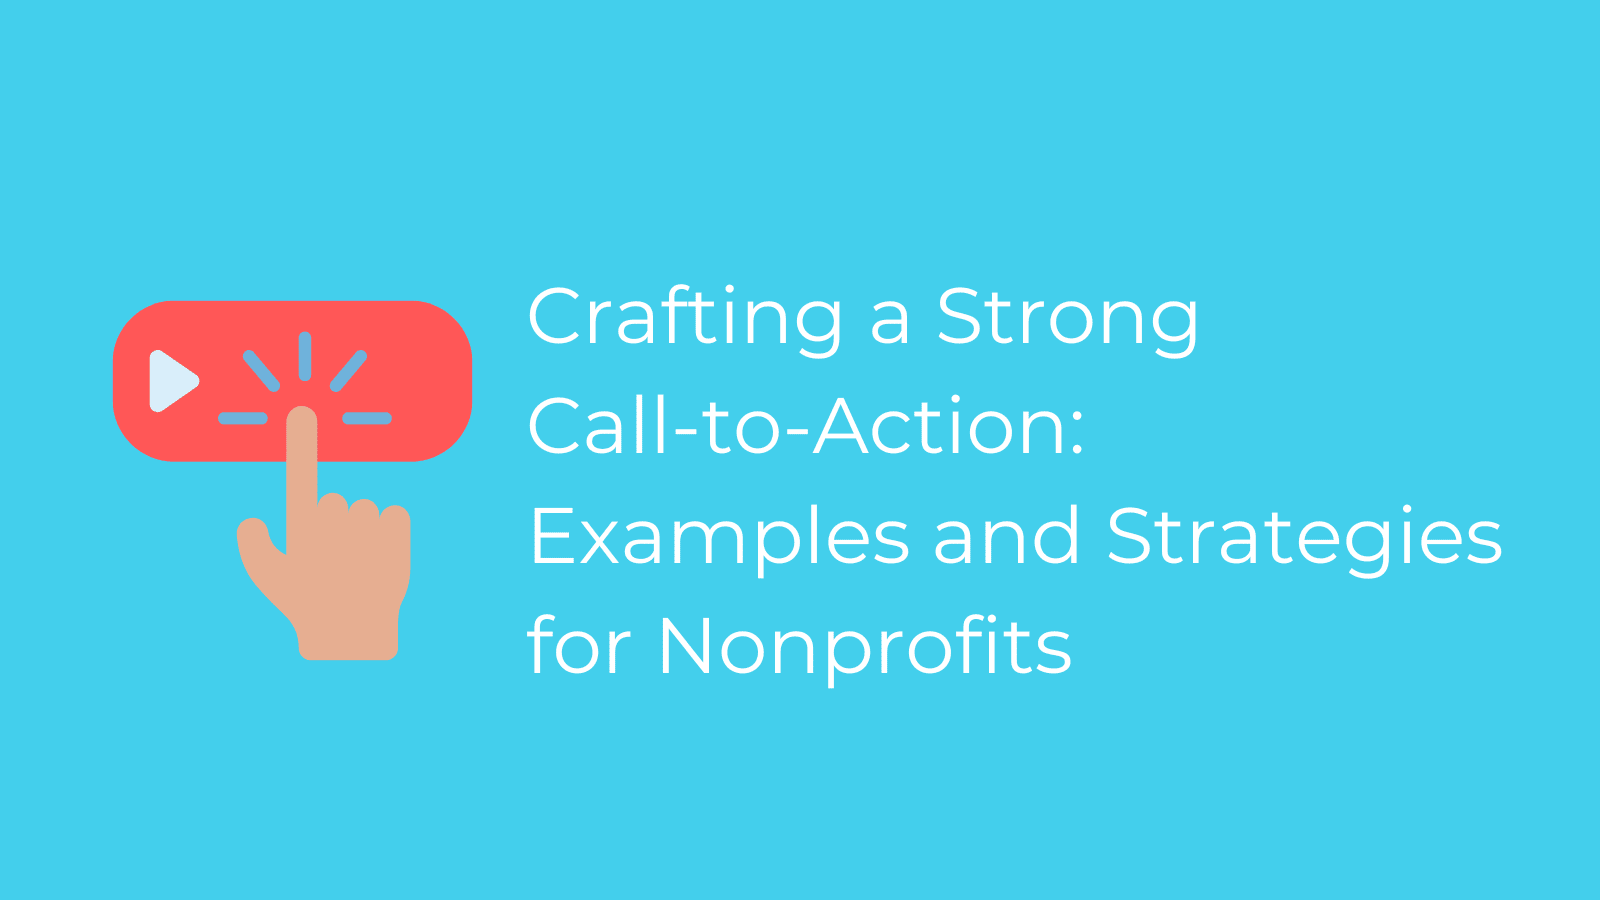 Crafting a Strong Call-to-Action: Examples and Strategies for Nonprofits